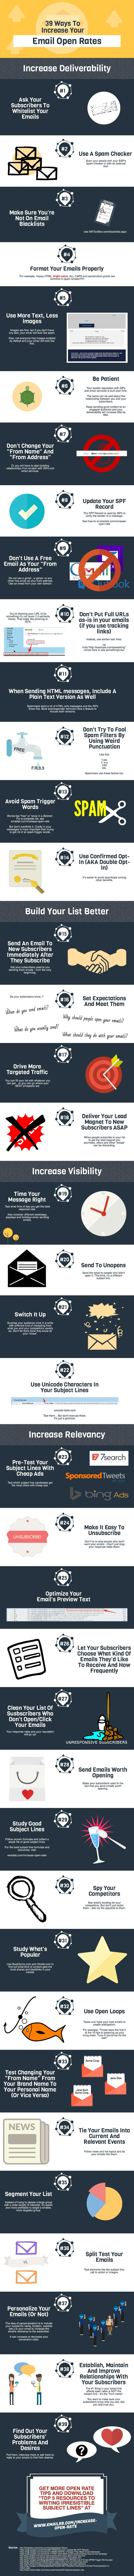 Infographic source: http://www.emailab.com/increase-open-rate/